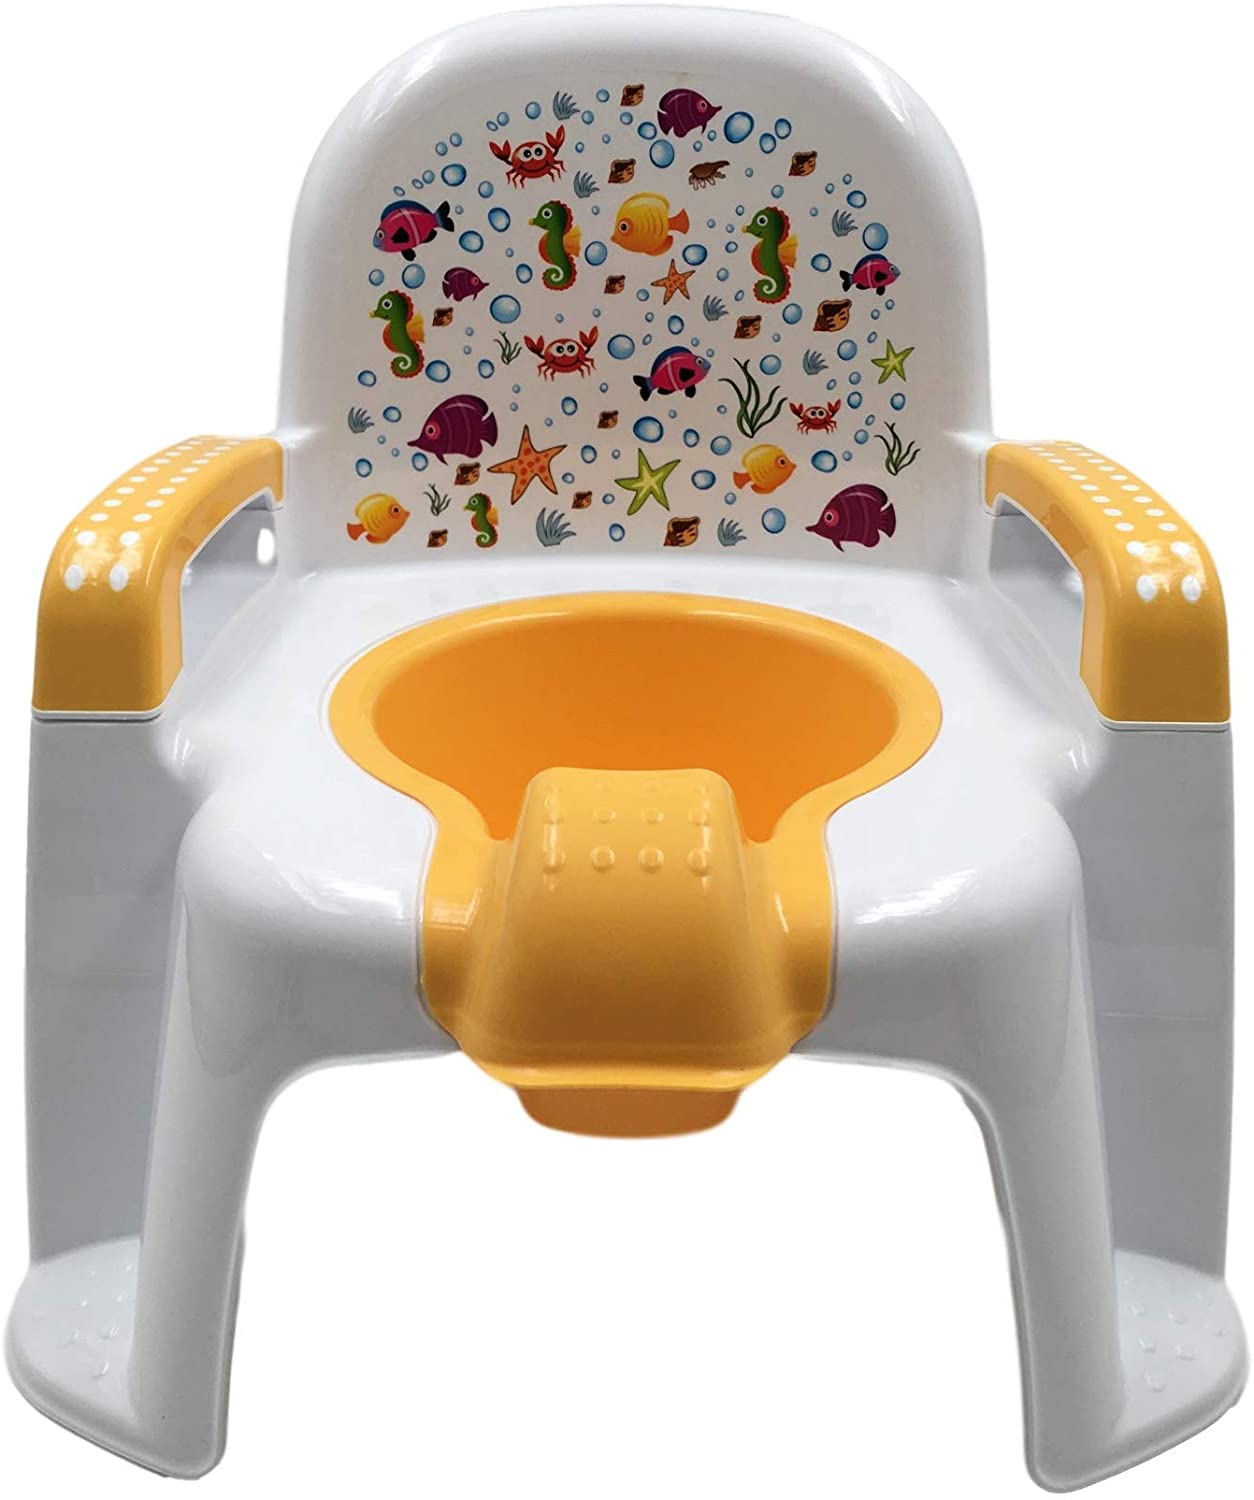 Colorful Plastic Potty Trainer for Babies/Toddlers 🚼 Comfortable Chair with Handles